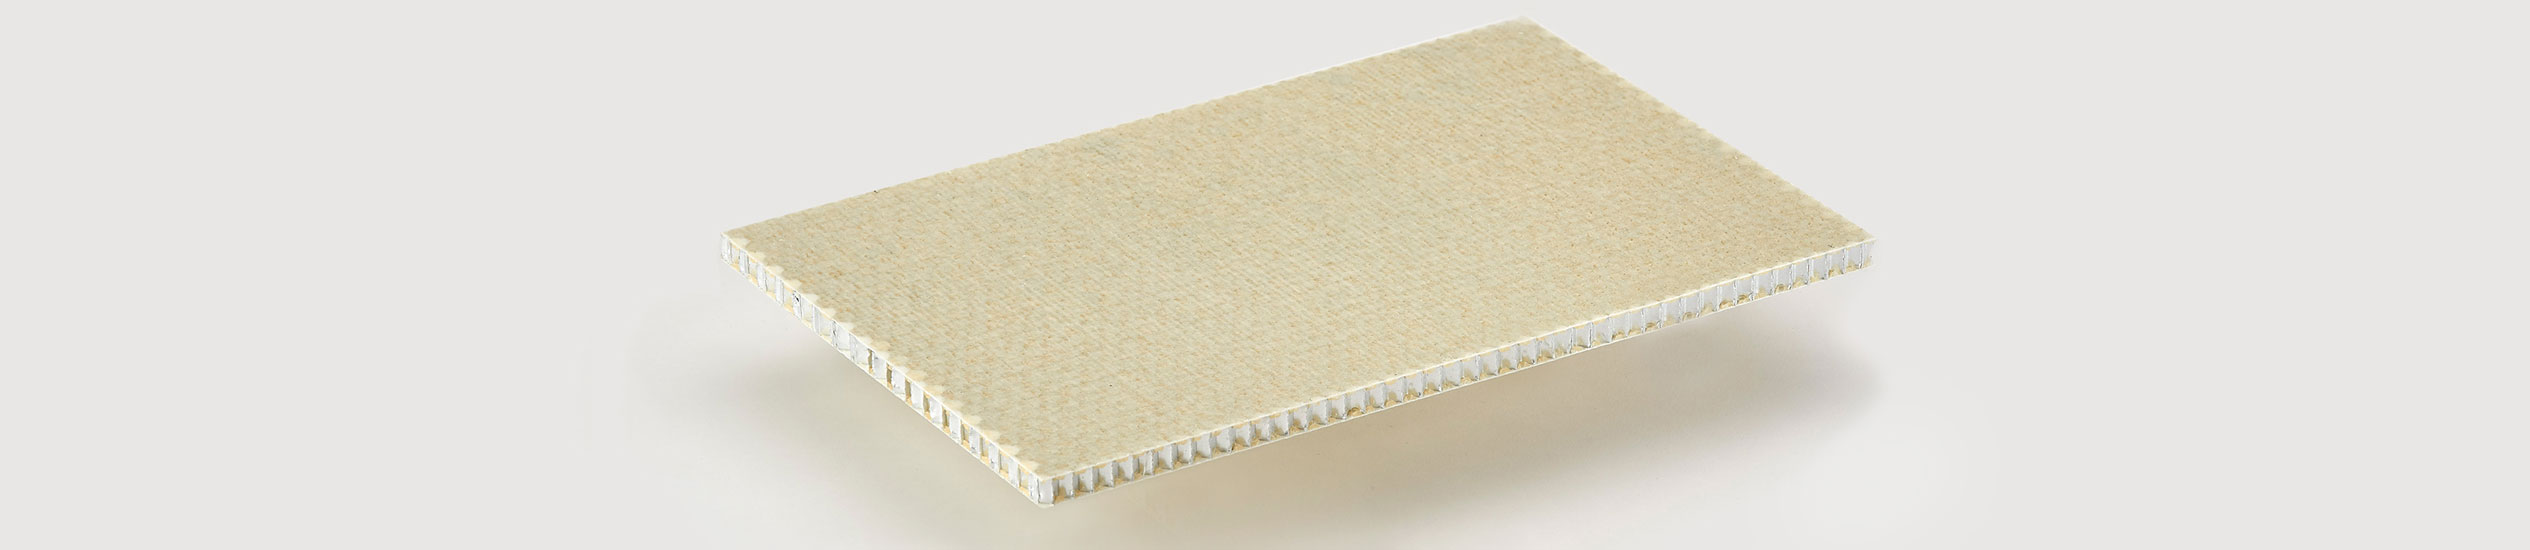 ALUSTEP® 500 LIGHT is a sandwich panel with a core in aluminium honeycomb faced with fiber glass impregnated with epoxy resin.